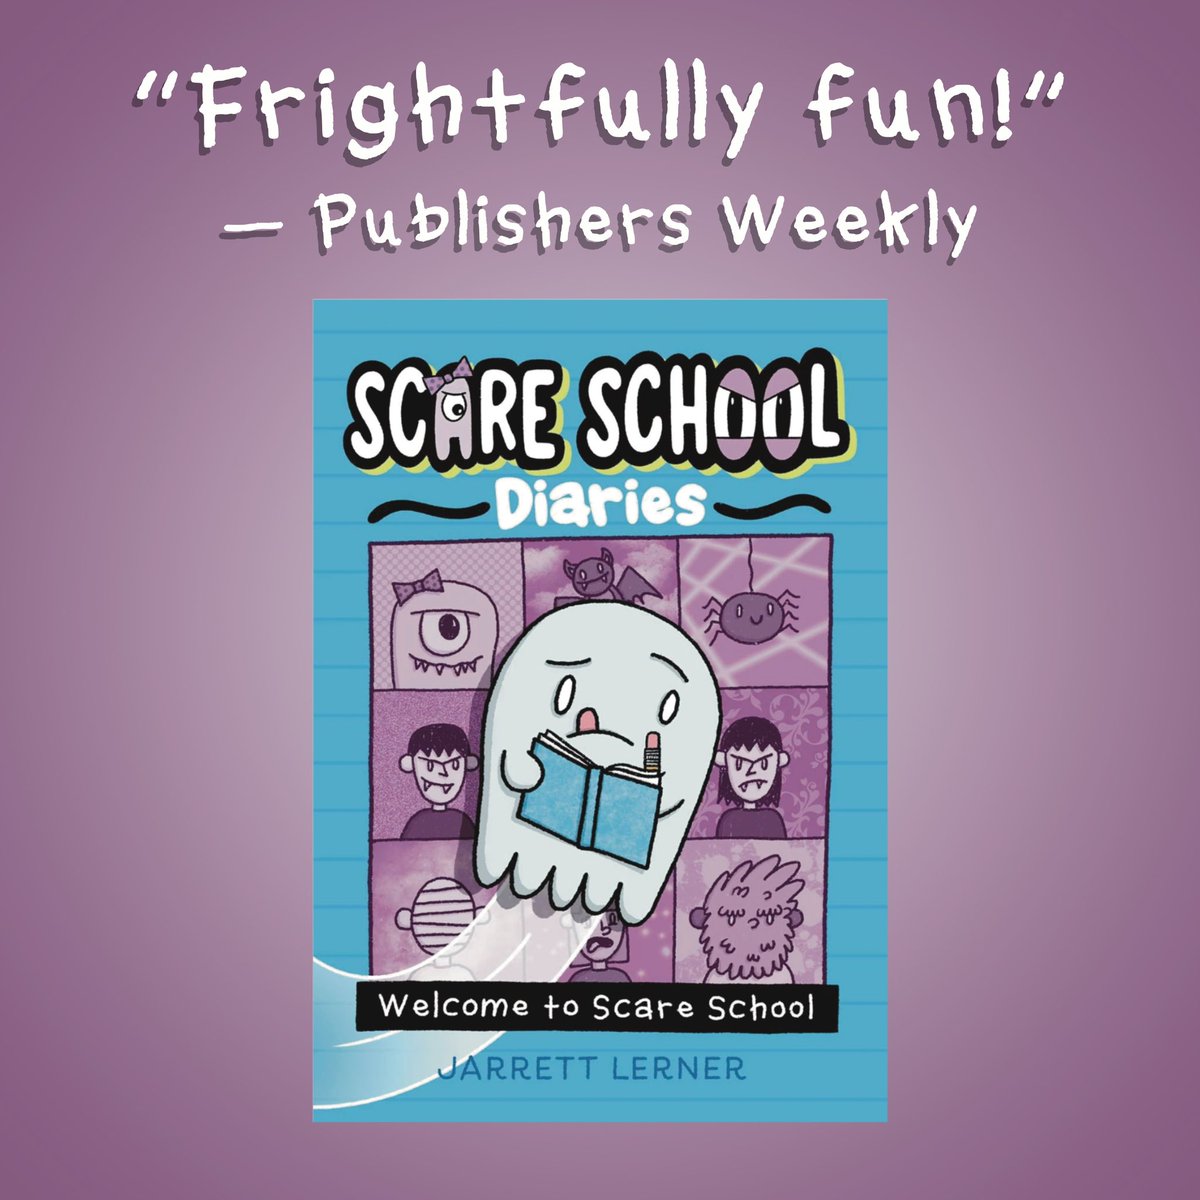 Trade reviews for Welcome to Scare School are coming in and they are excellent! Here’s the headline from Publisher Weekly’s review of this first book in my newest series. It’s out July 16th but you can preorder today. Do so from @SilUnicornActon if you want your copies signed!